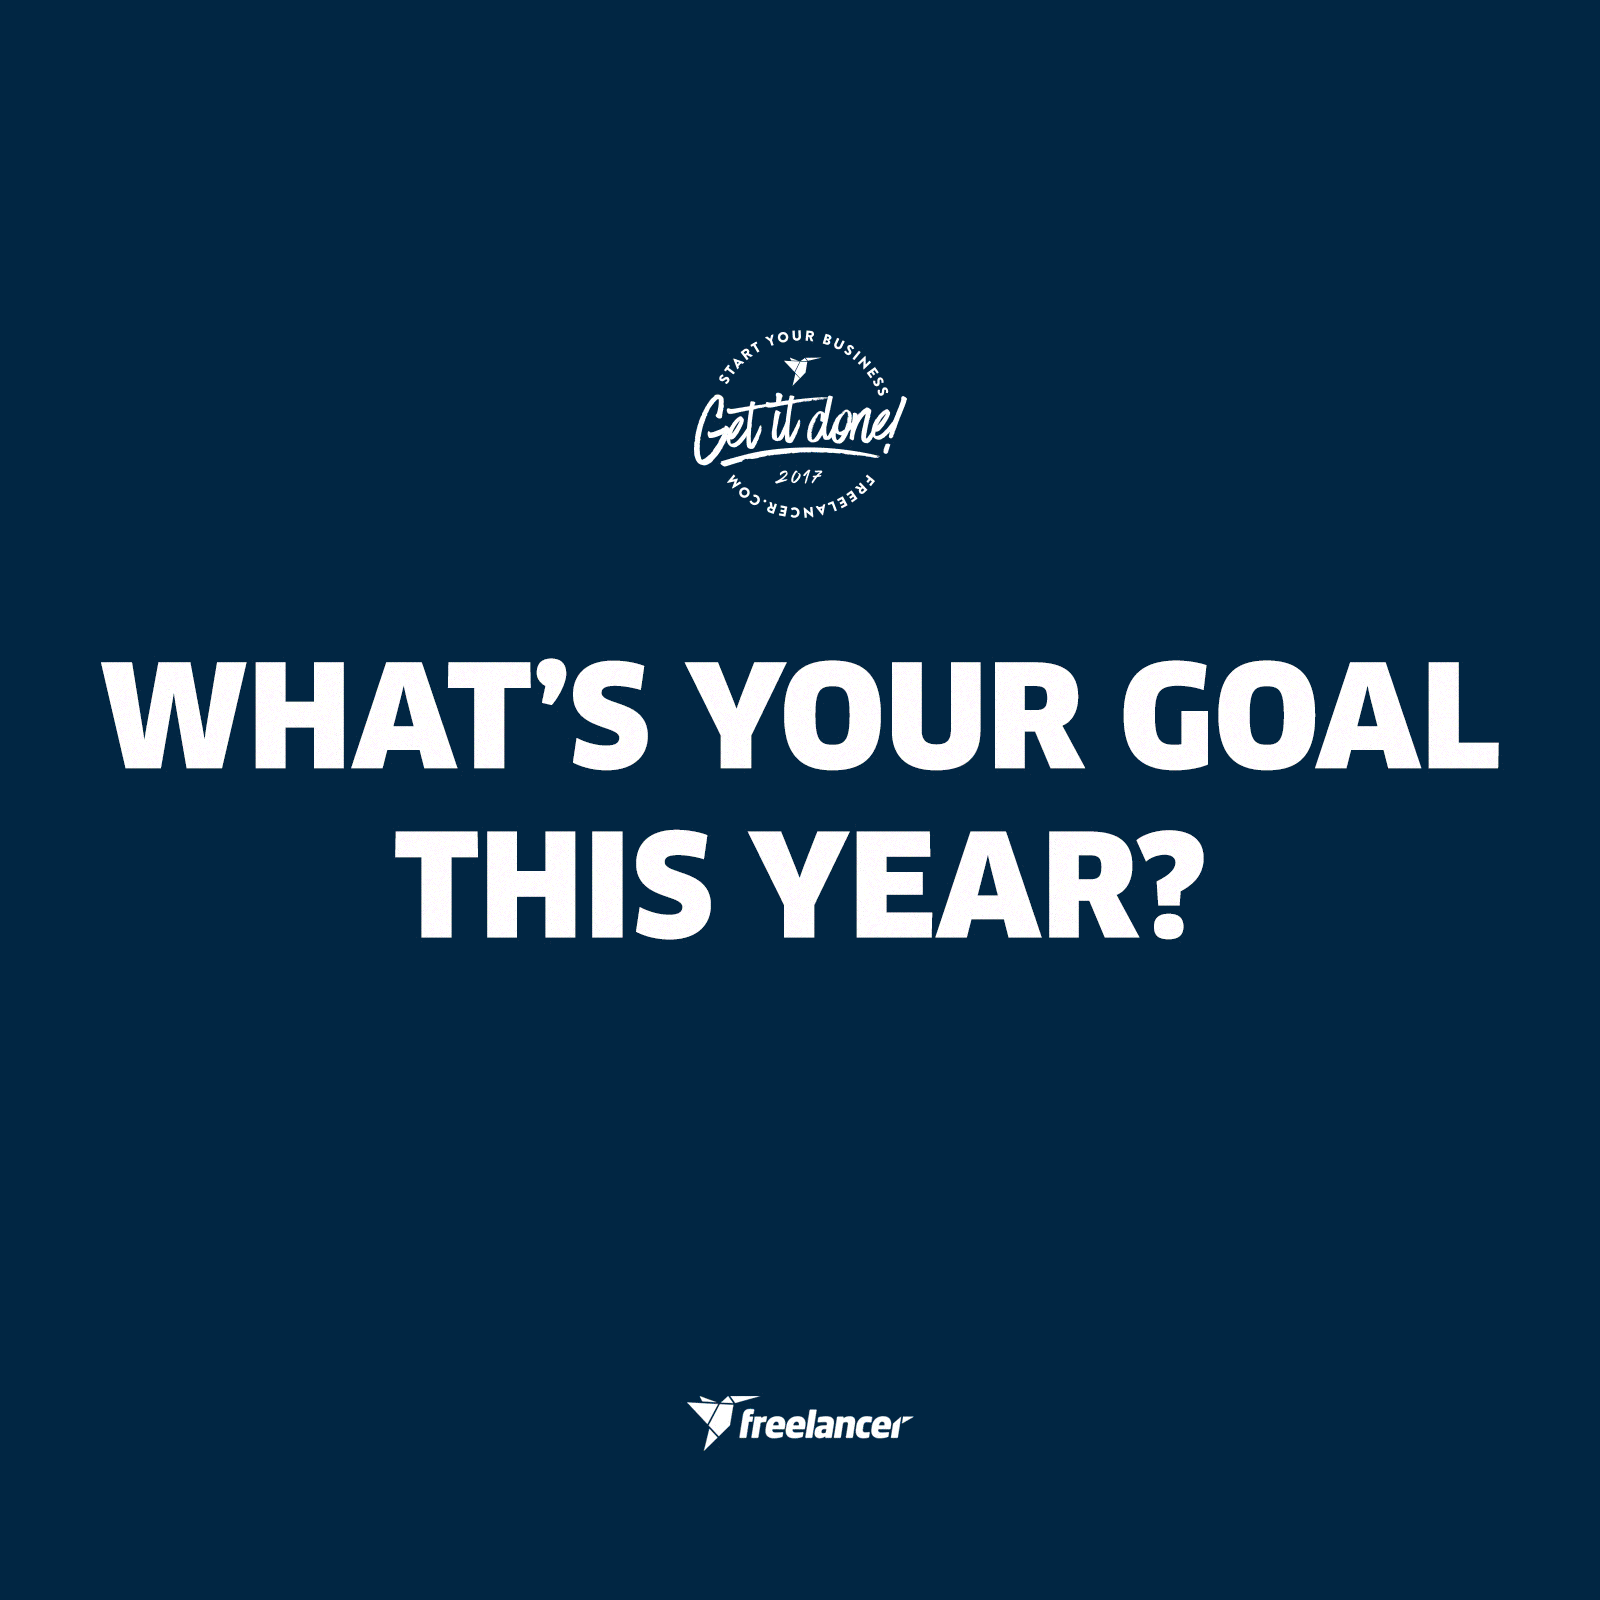 What Do You Want to Achieve This Year? [POLL] - Image 1